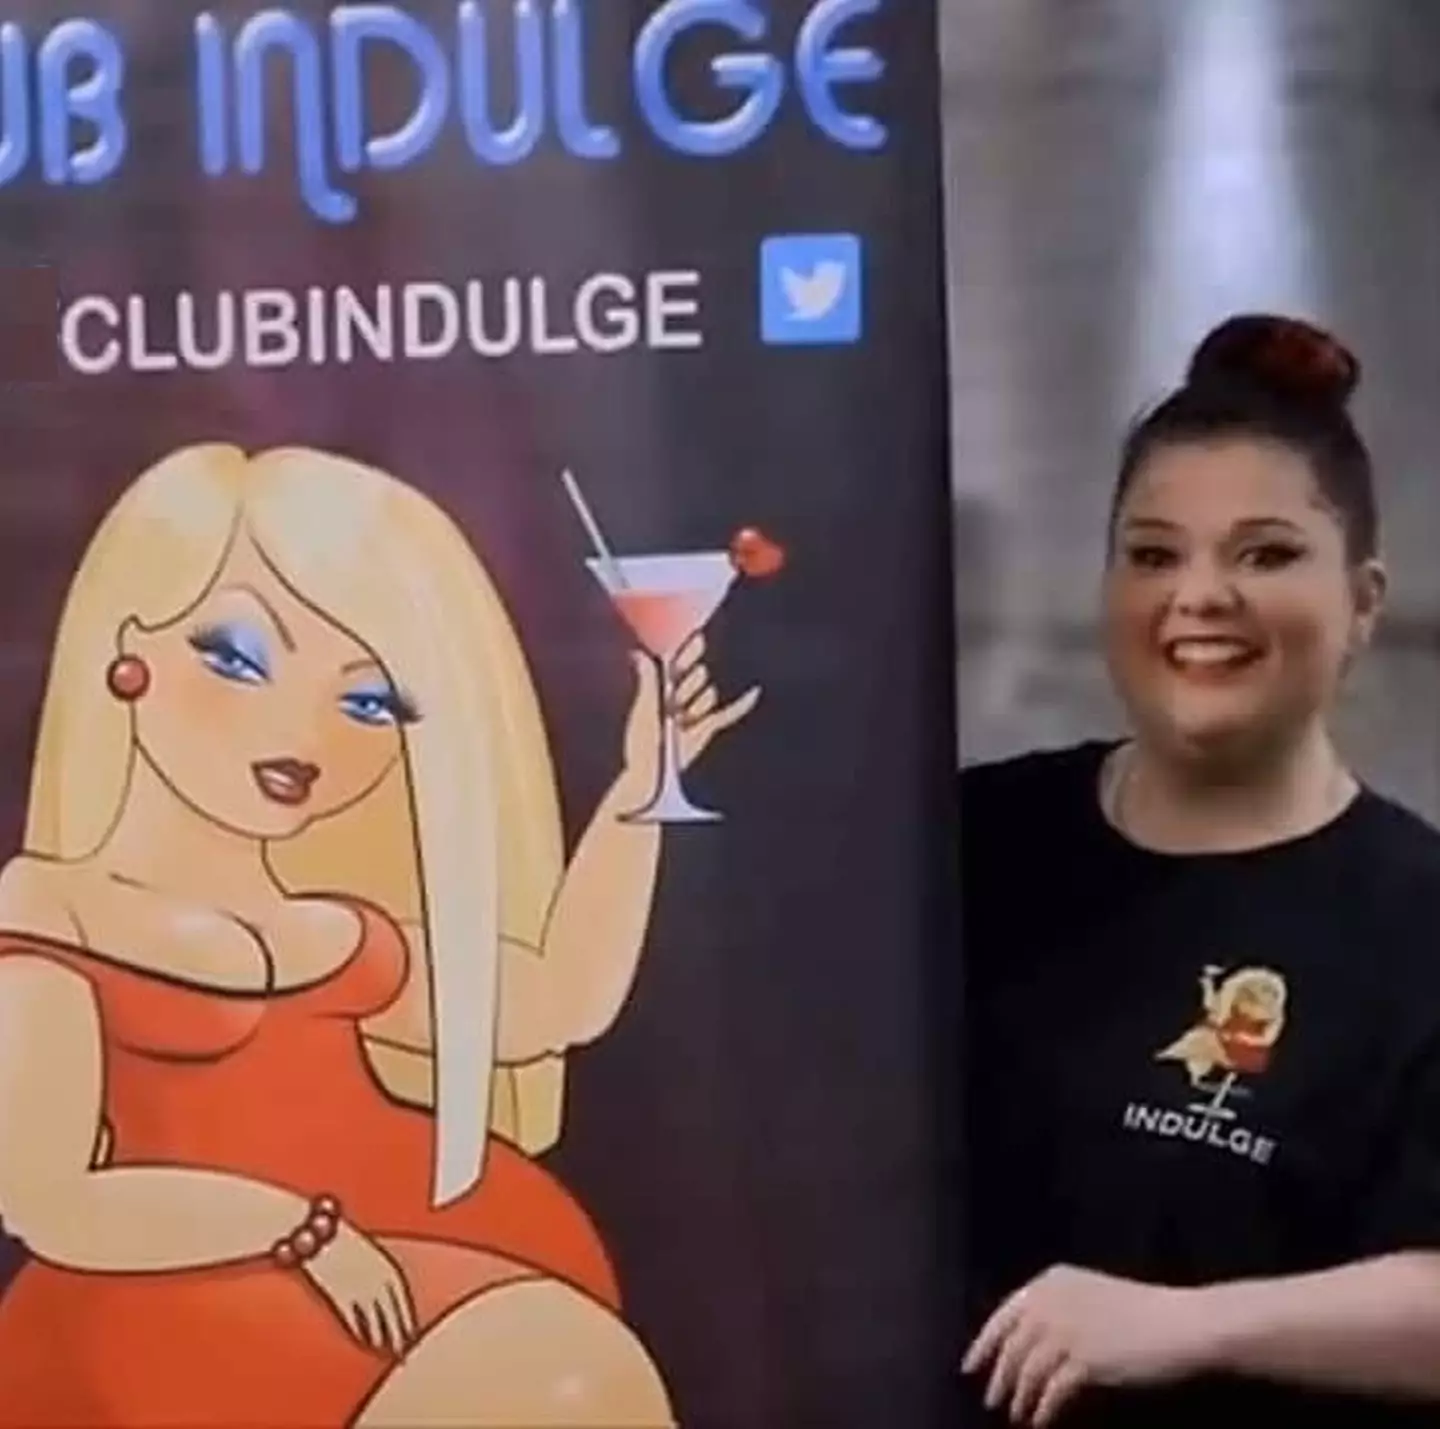 Club Indulge has been in operation since 2013 (